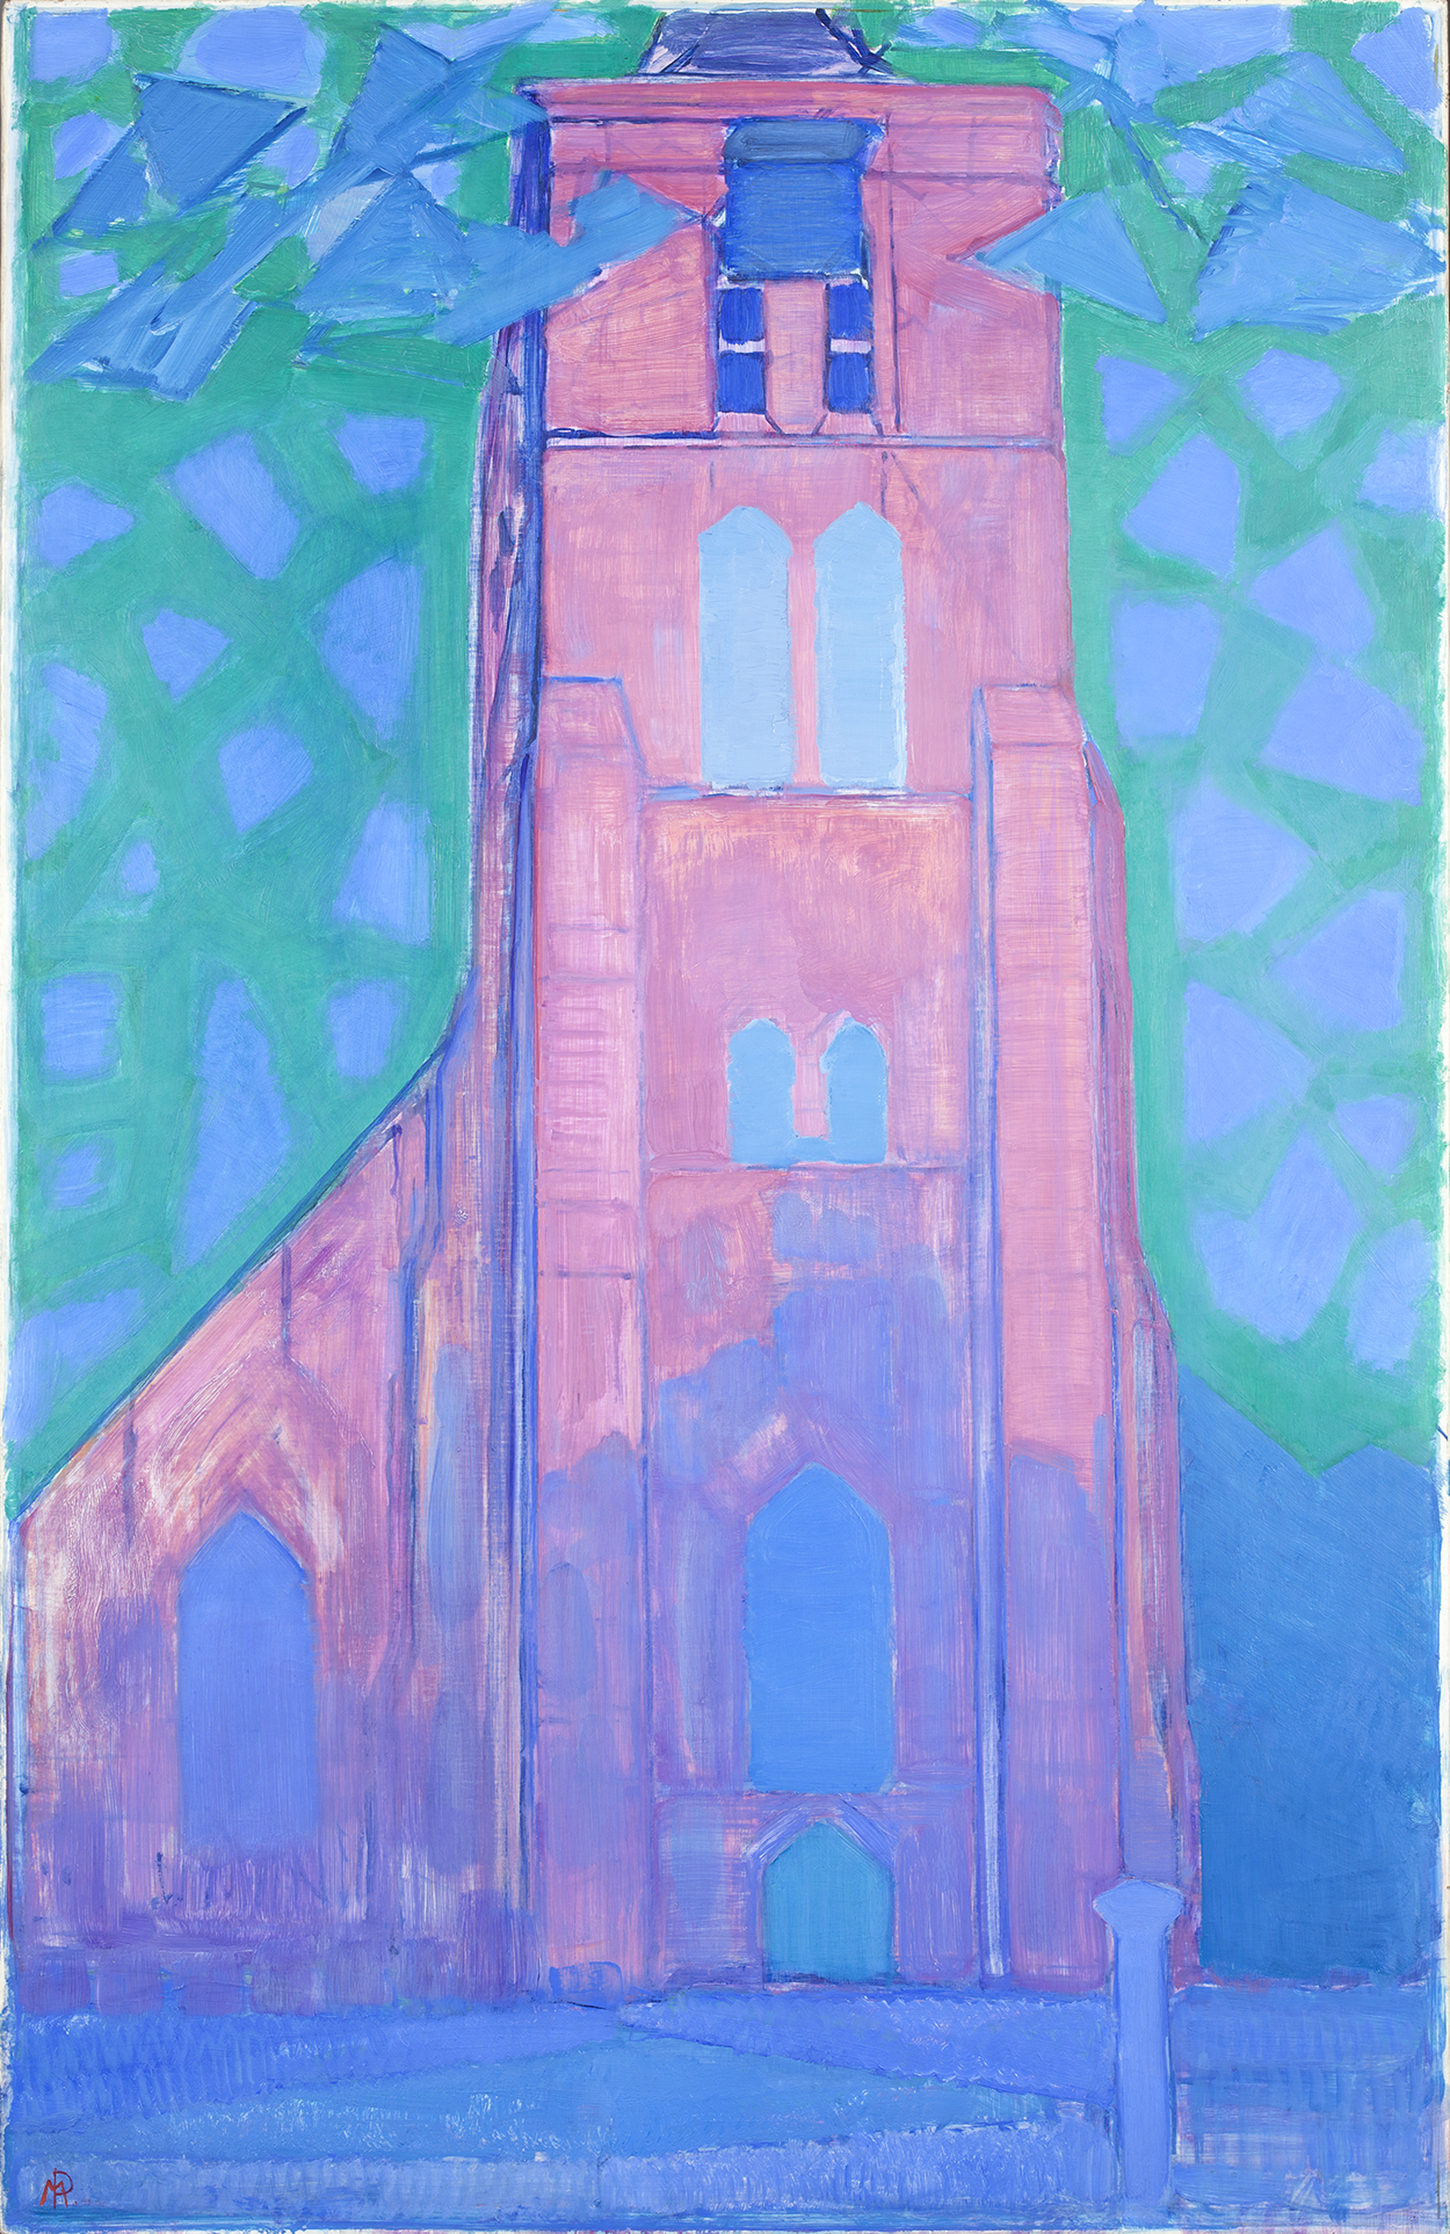 A church tower painted in vivid bright pink, with blue and green background